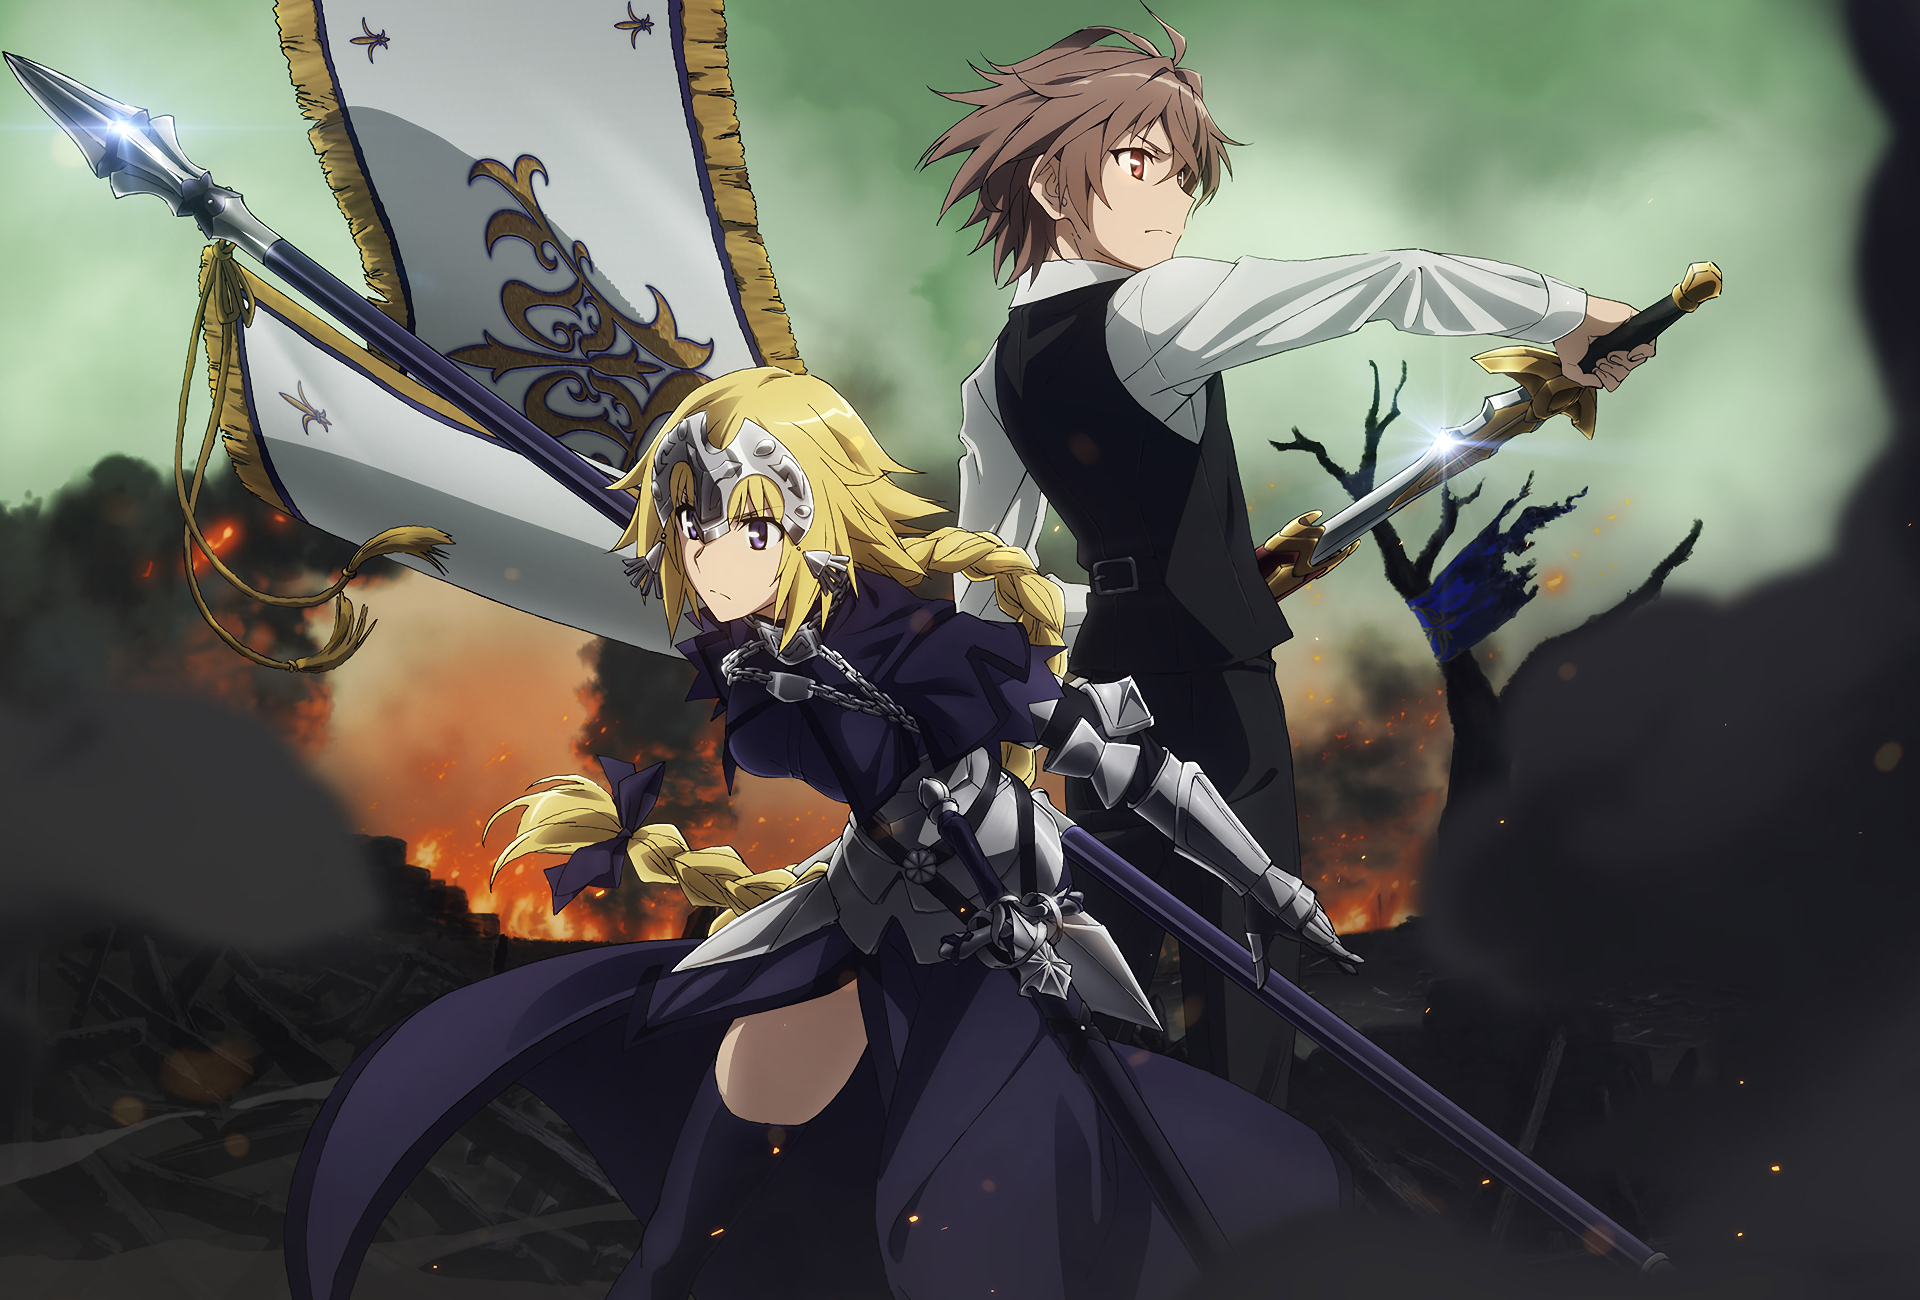 Free Download Fateapocrypha Hd Wallpaper Background Image 19x1300 Id 19x1300 For Your Desktop Mobile Tablet Explore 50 Apocrypha Wallpaper Apocrypha Wallpaper